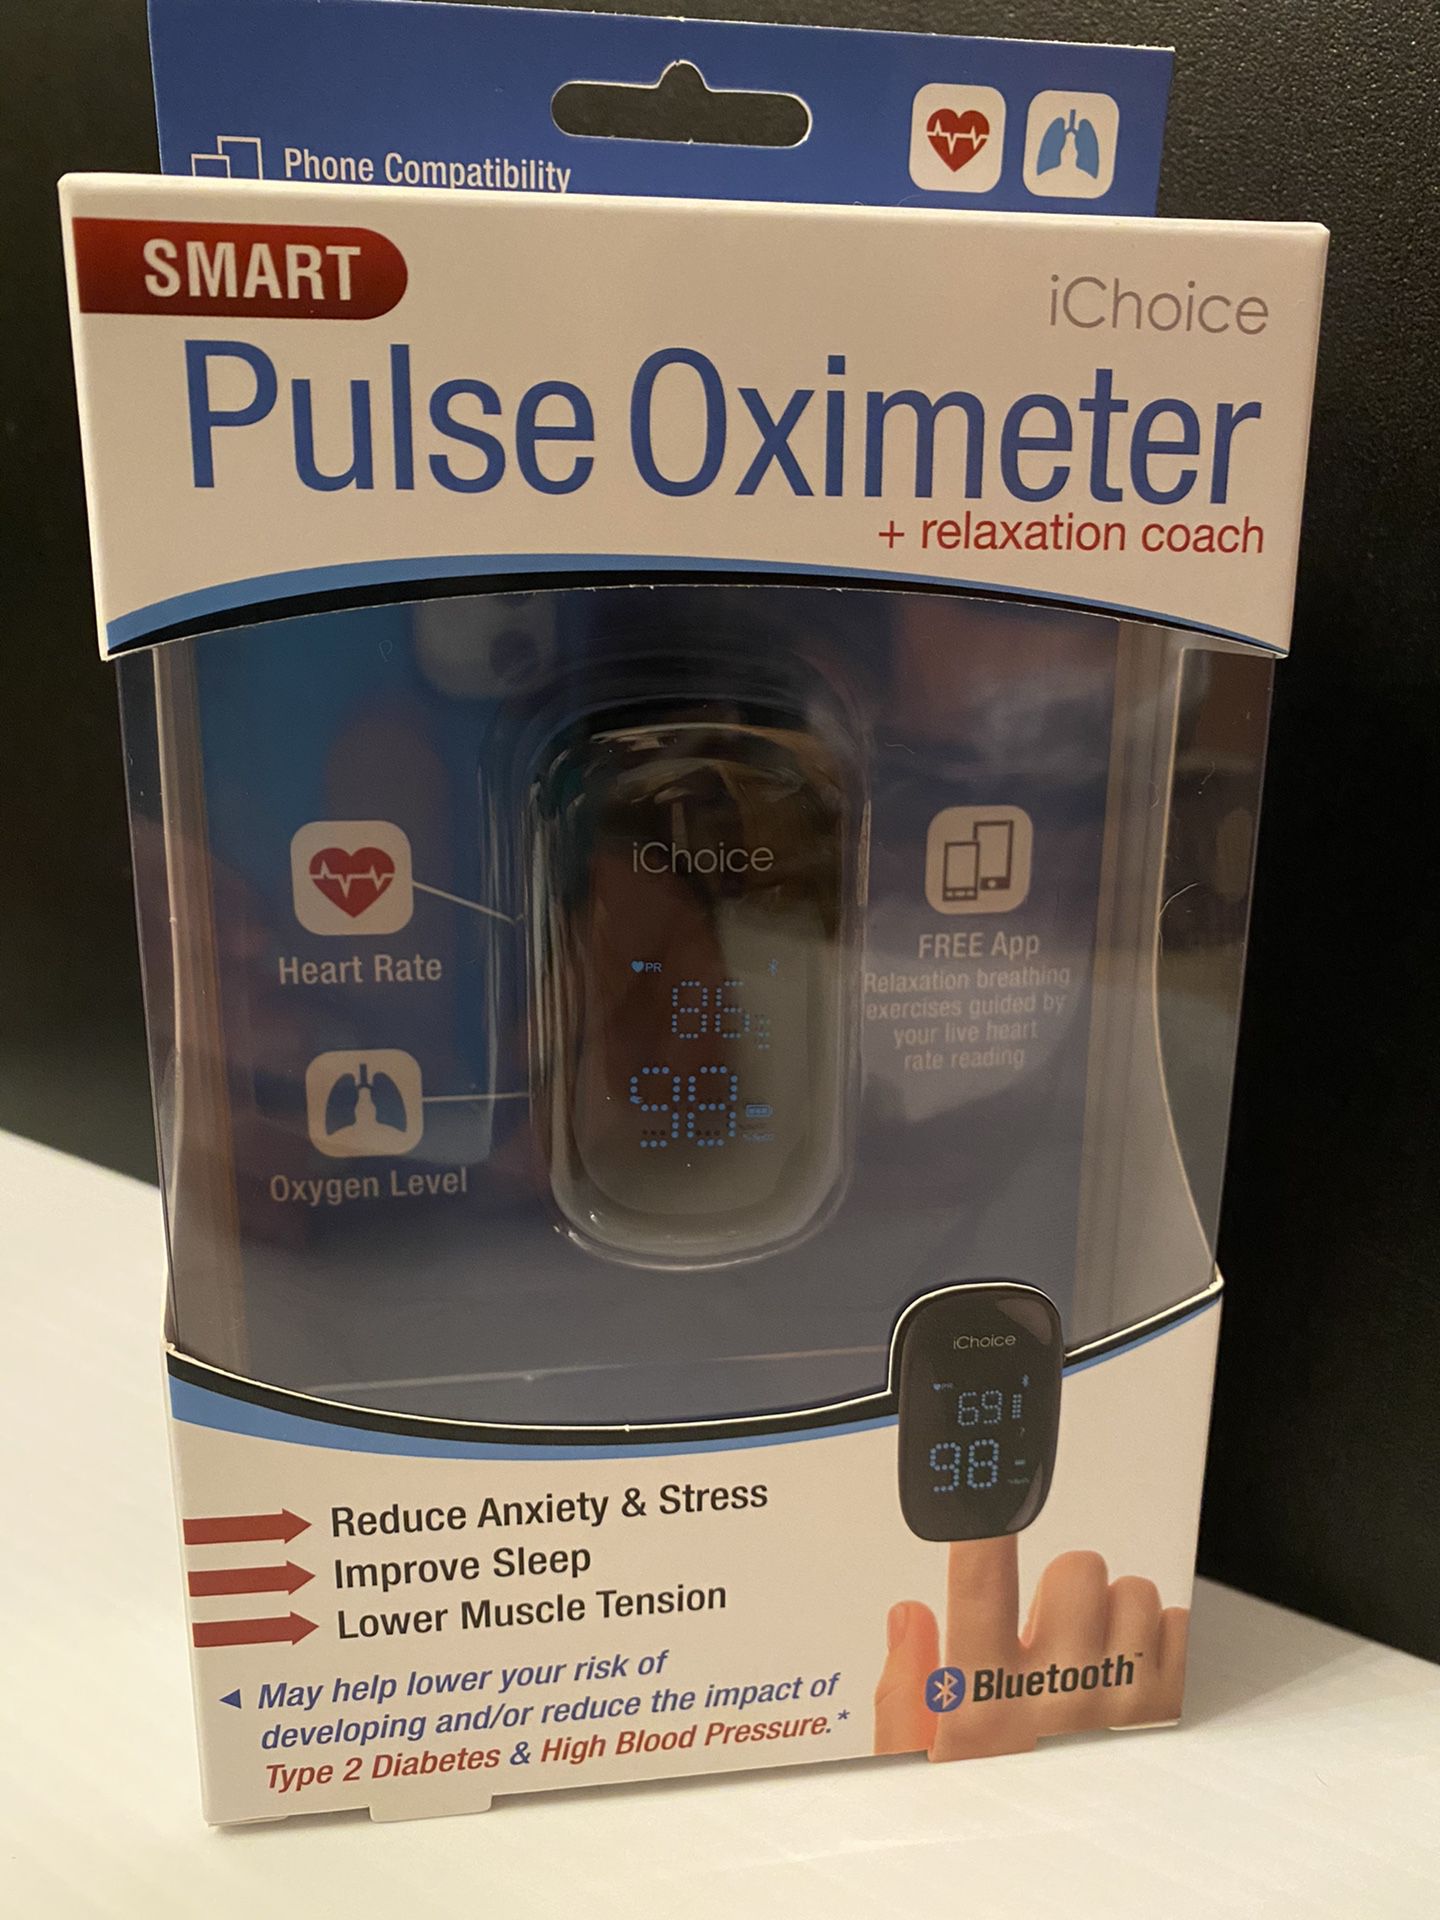 NEW iChoice Smart Pulse Oximeter + relaxation coach. 69.99$ Retail